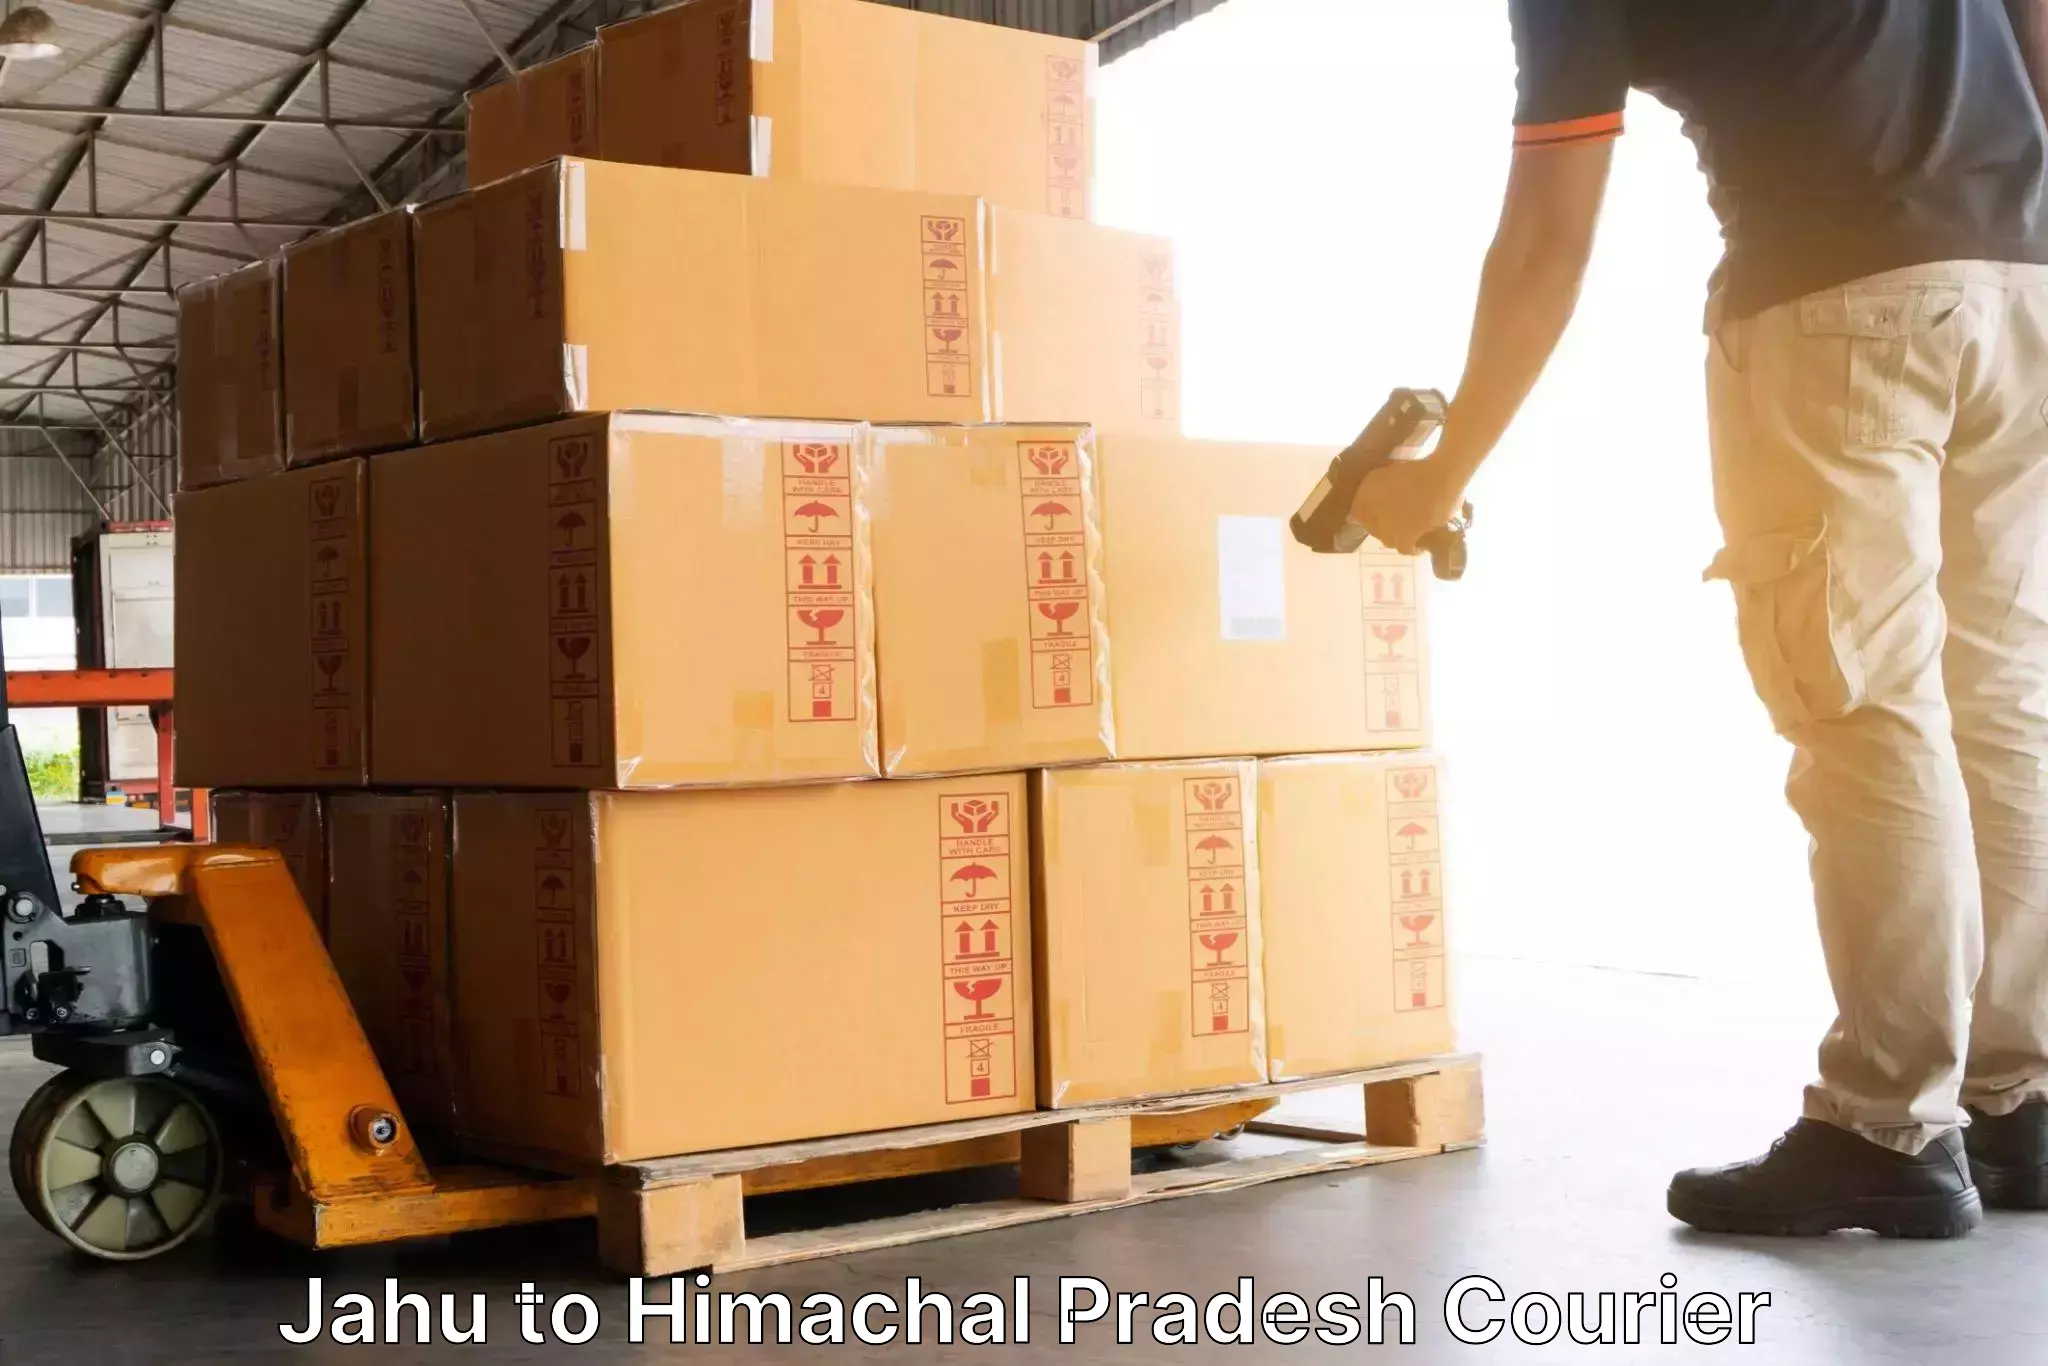 Efficient parcel tracking Jahu to Dharamshala